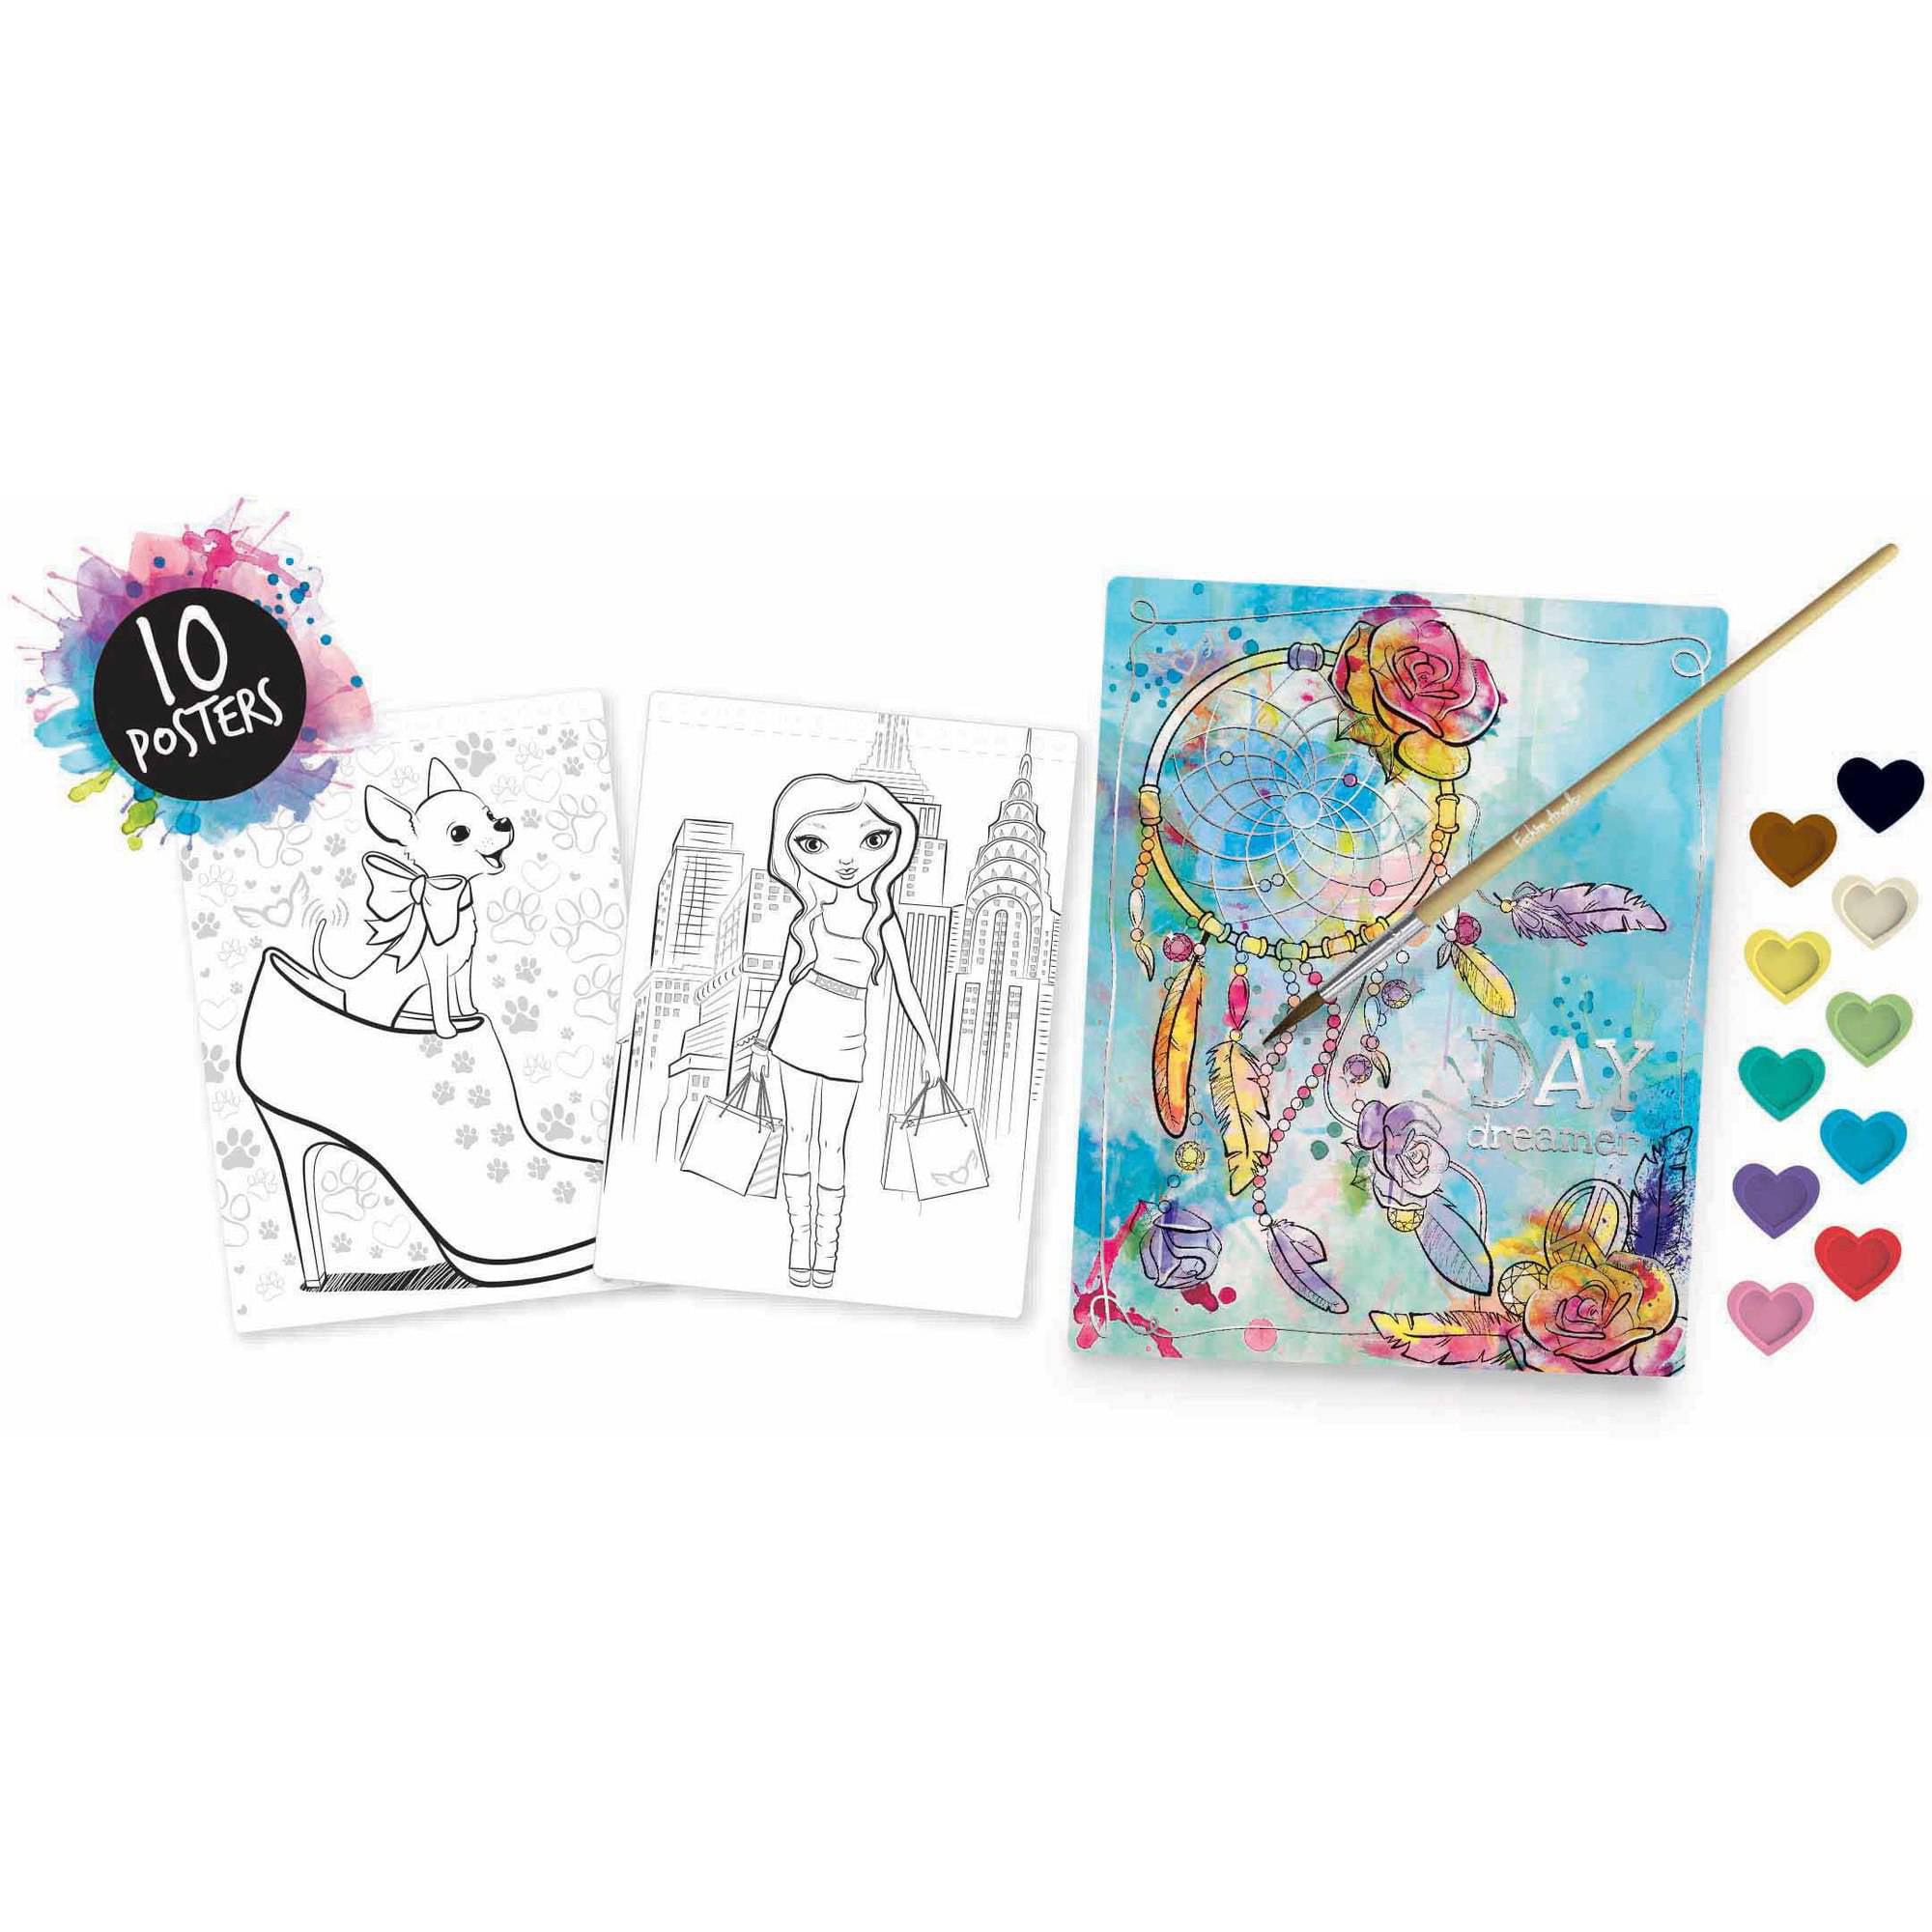 Fashion Angels Squishmallows Watercolor Poster Set - DIY Painting Kit for Boys, Girls, and Adults - Includes 30pg Spiral Bound Watercolor Sketchbook